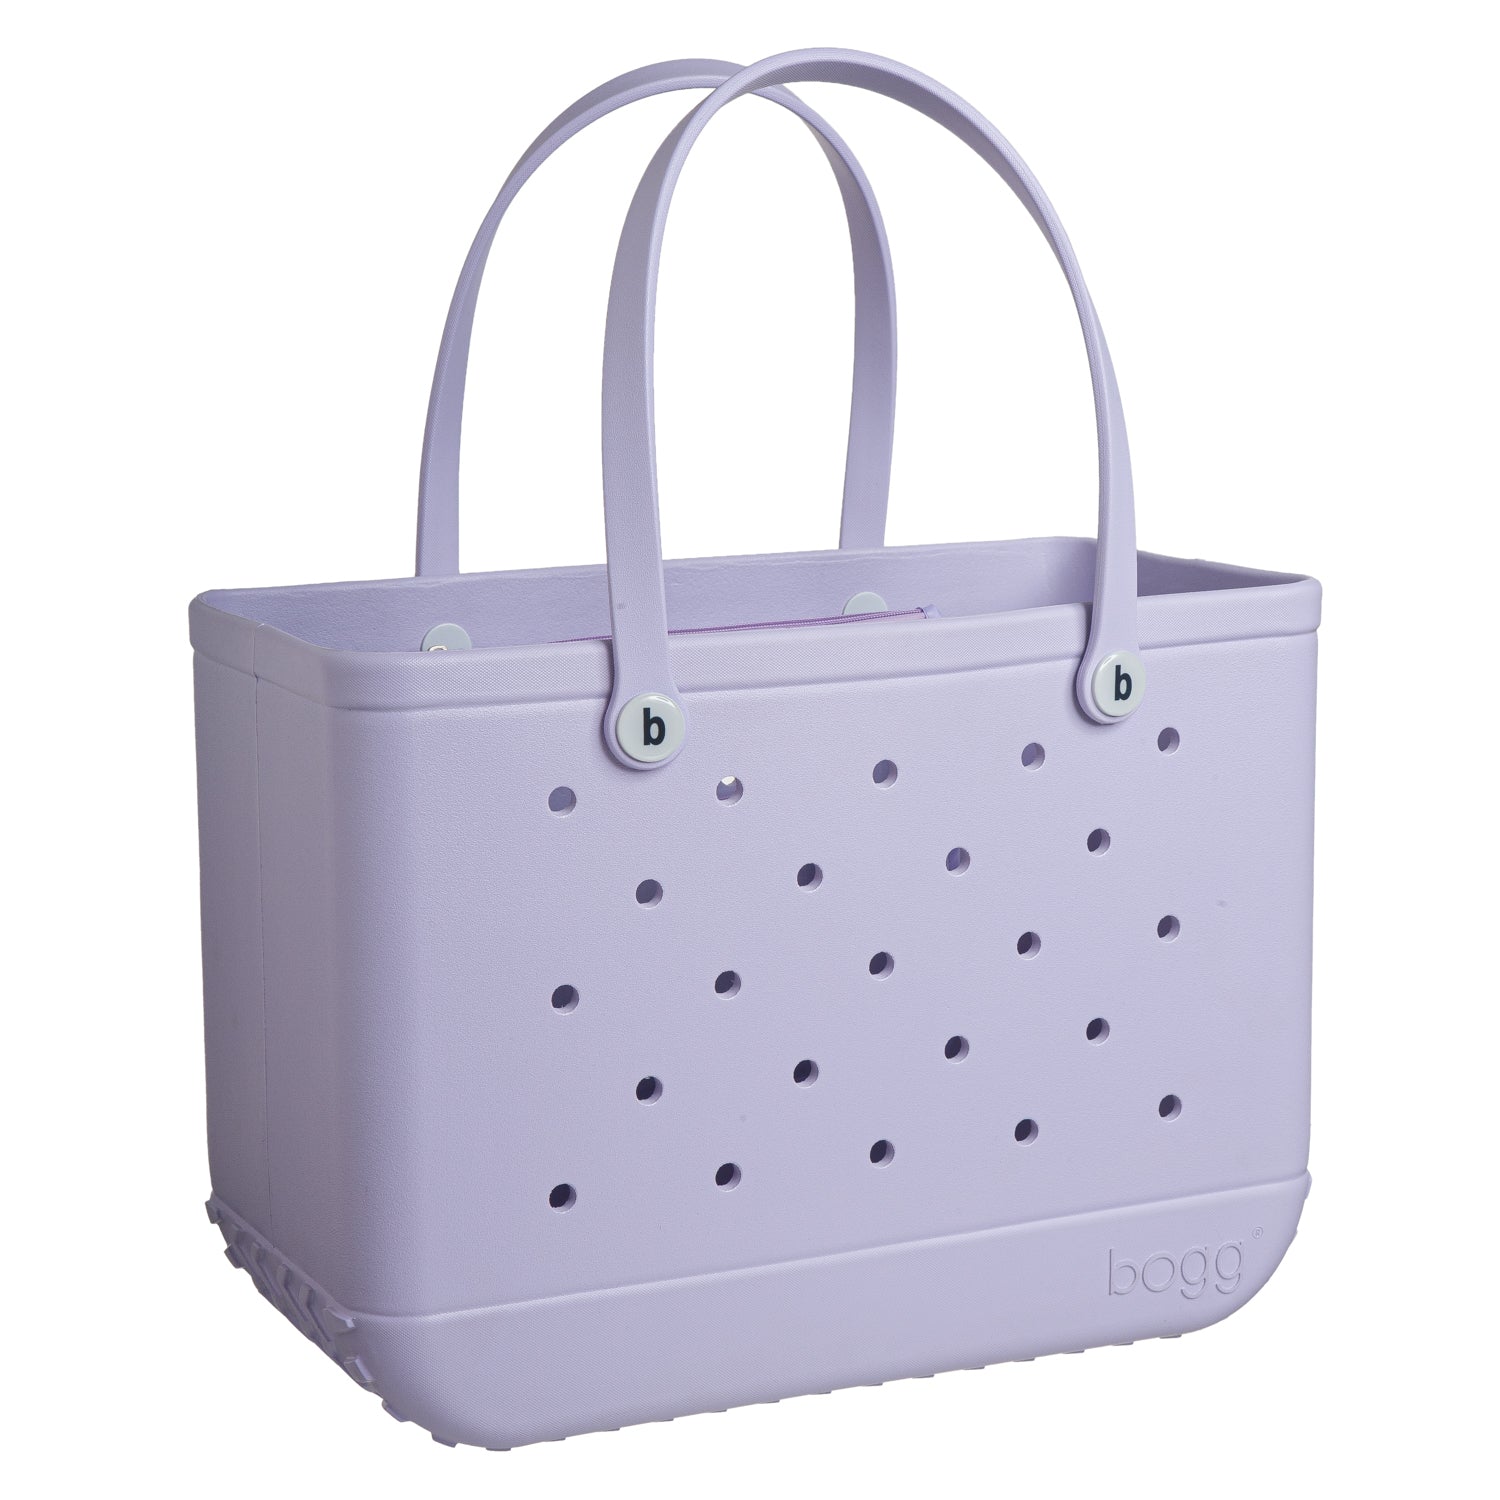 Filt Authentic French Medium Bag in Lilac